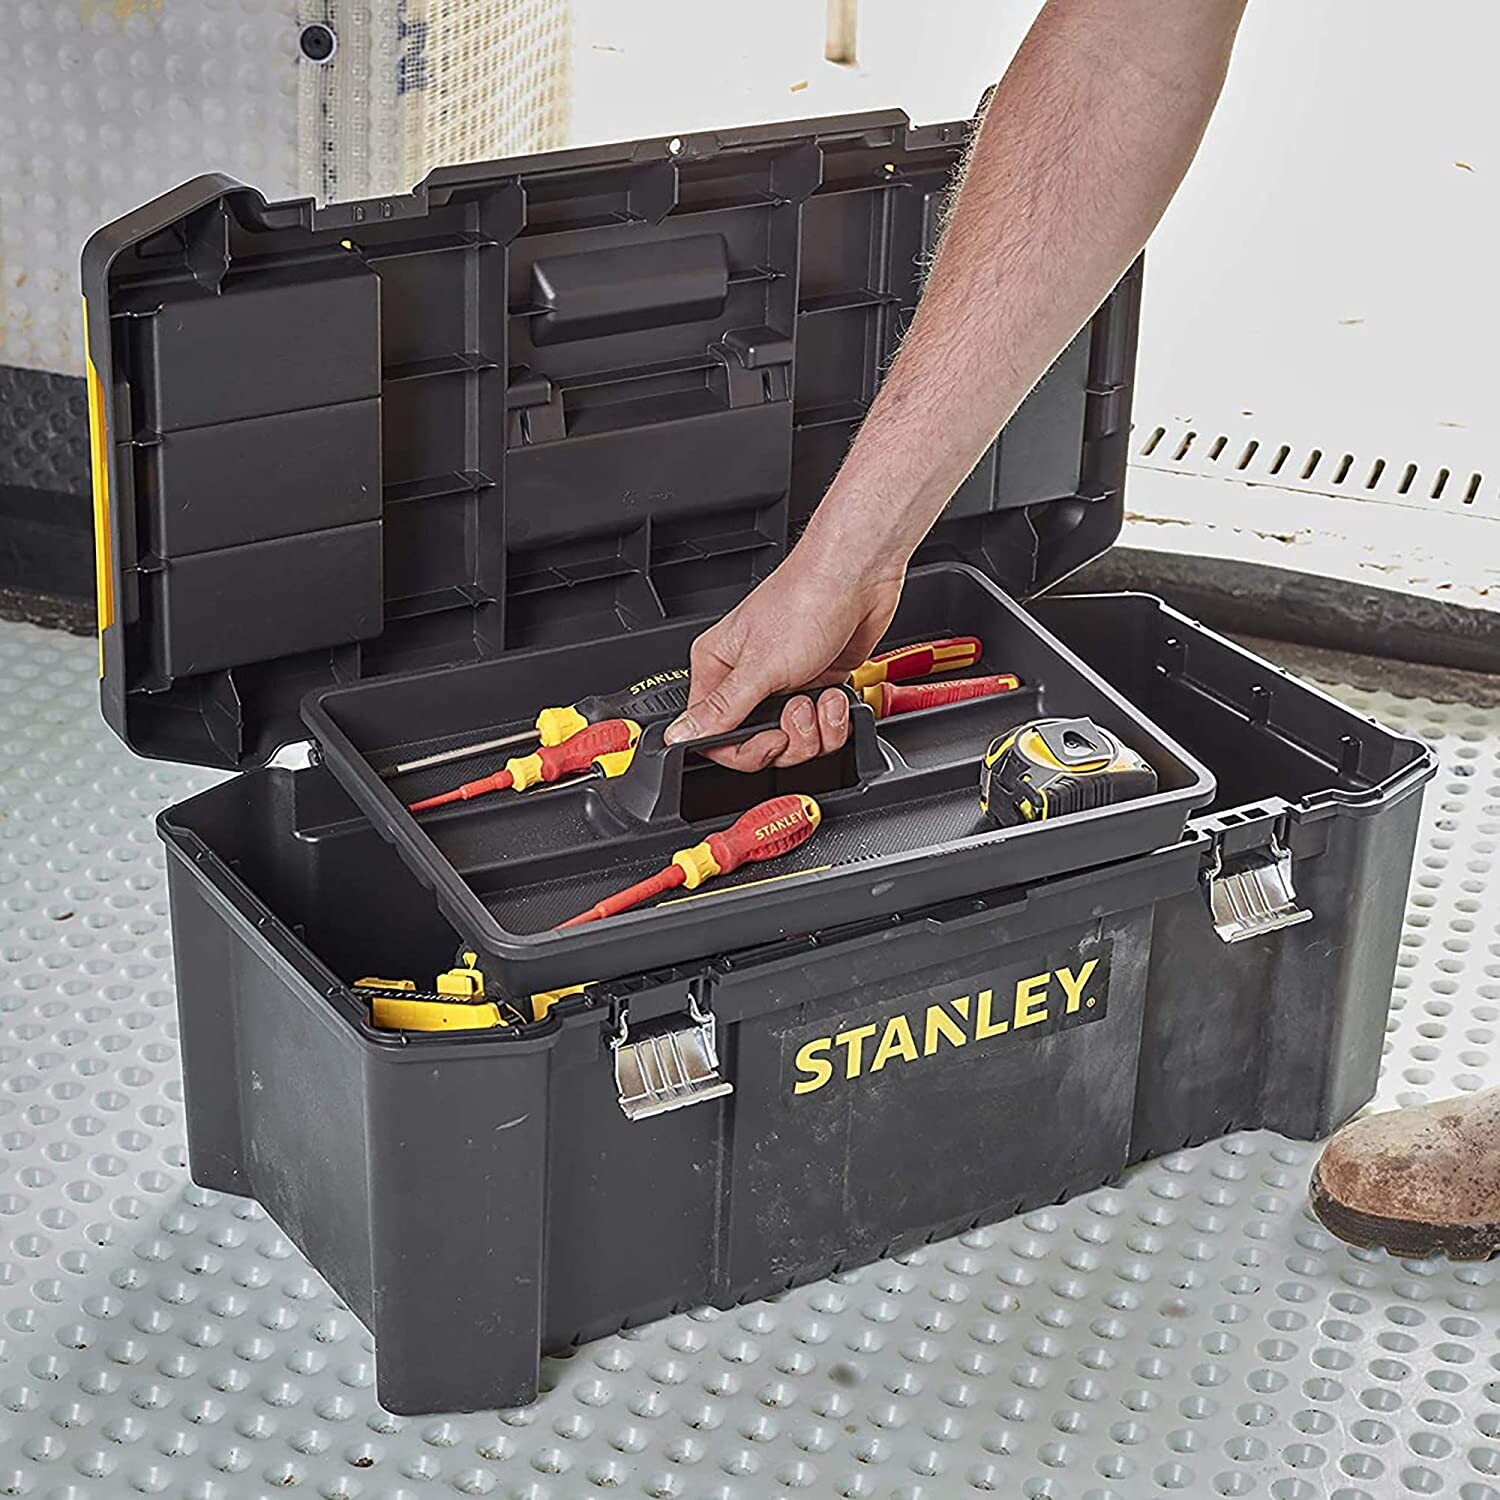 Buy Stanley STA182976 Essential Toolbox from £26.95 (Today) – Best Deals on